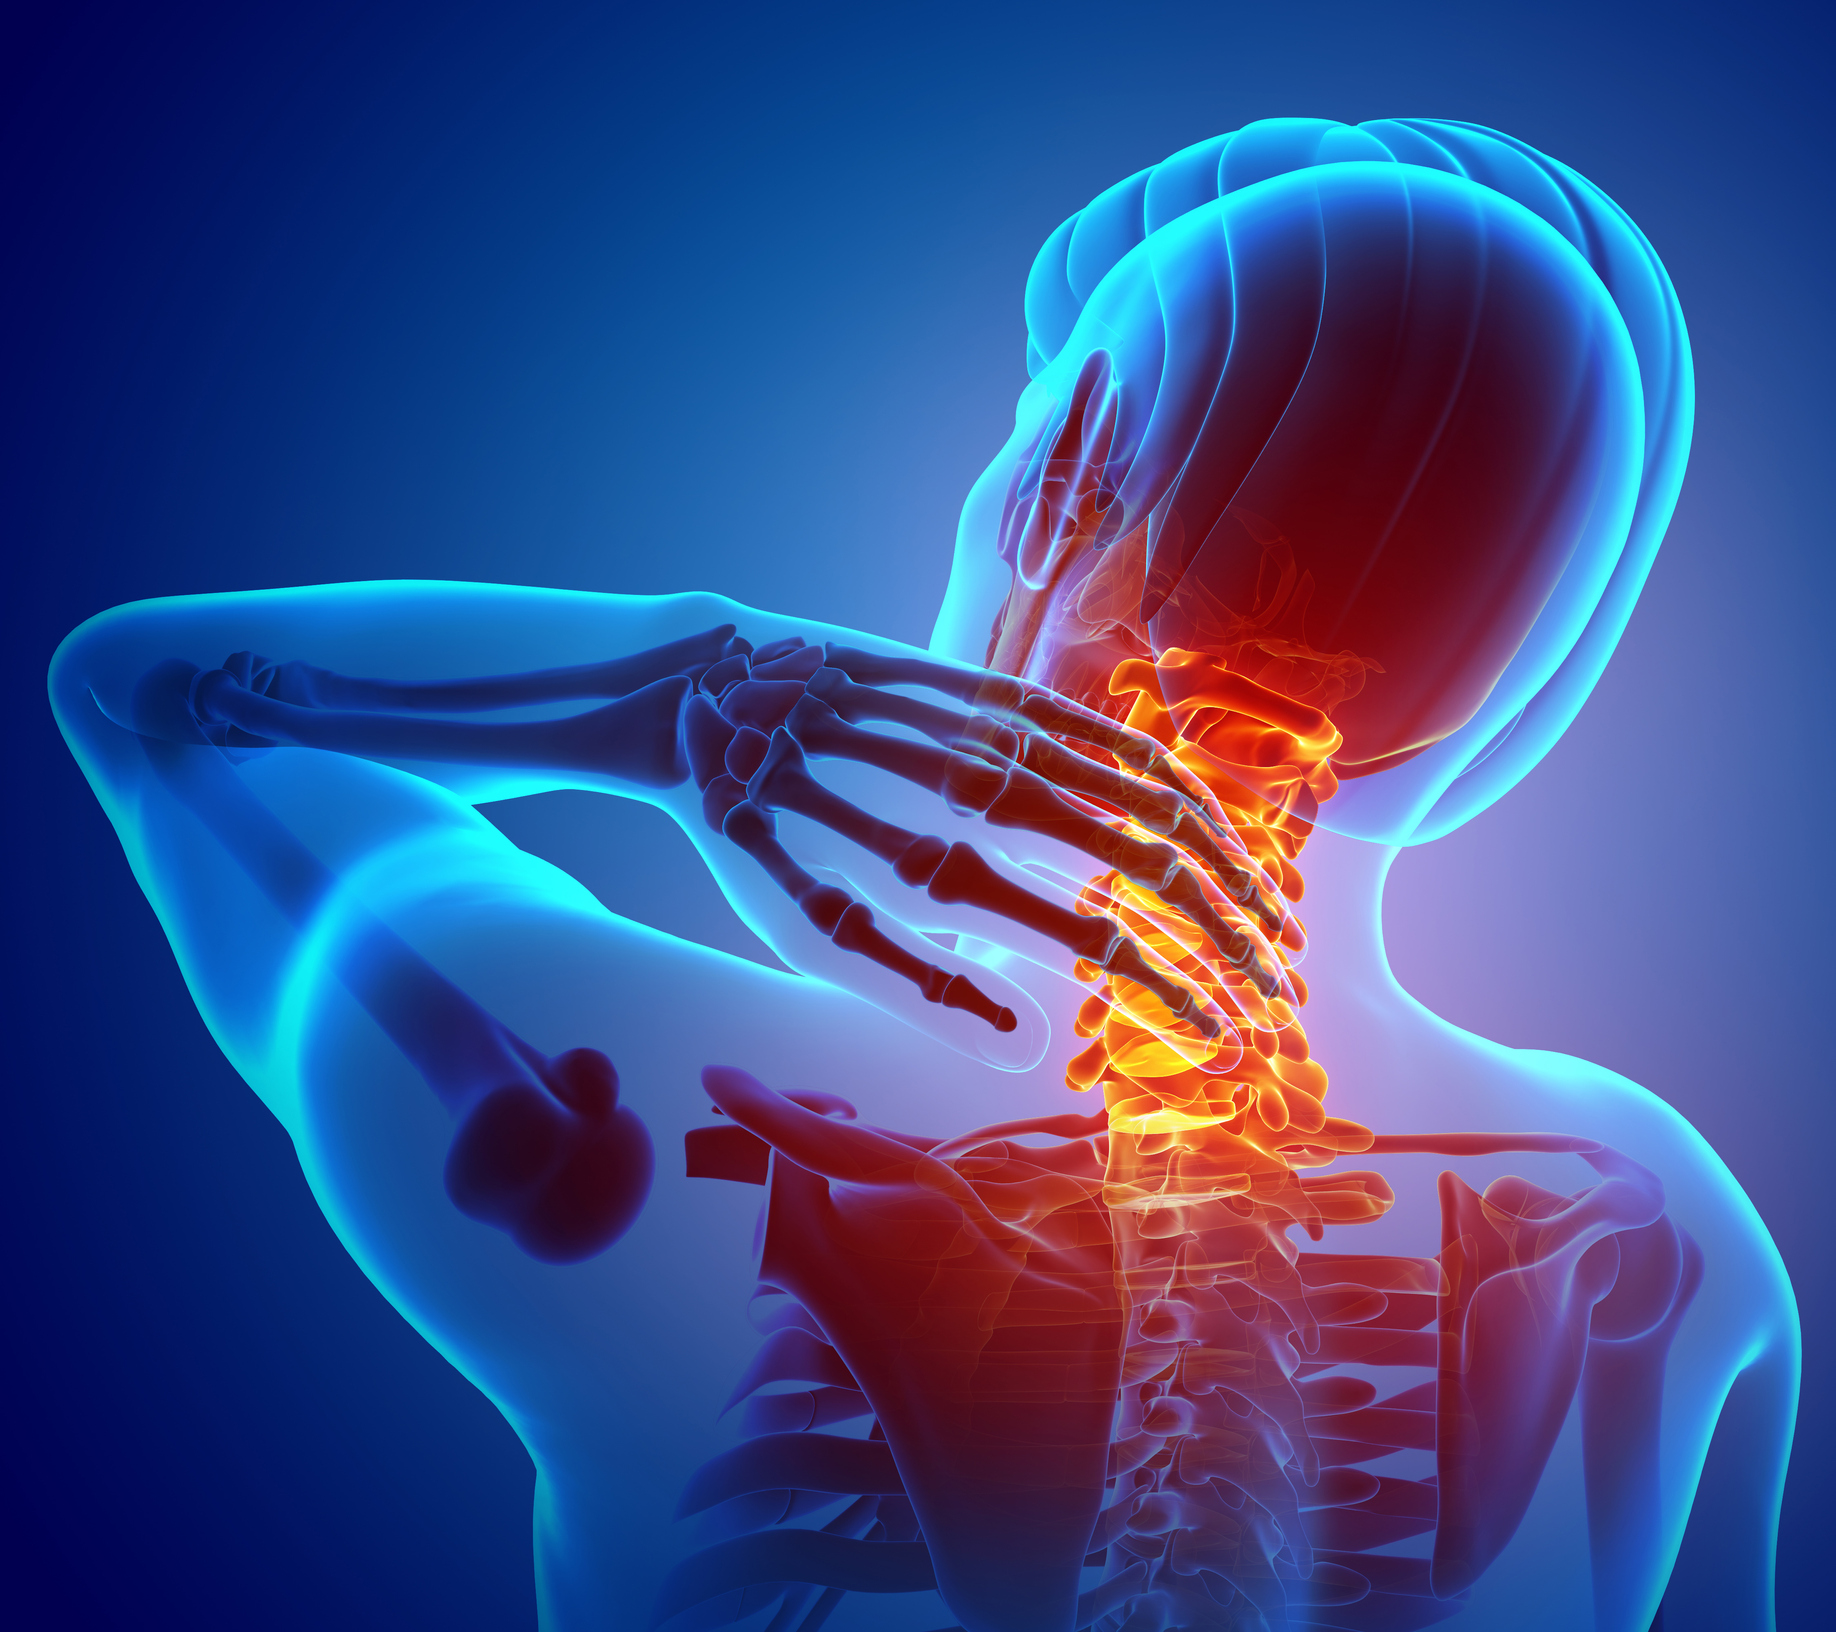 Neck Injury and Pain After a Car Accident